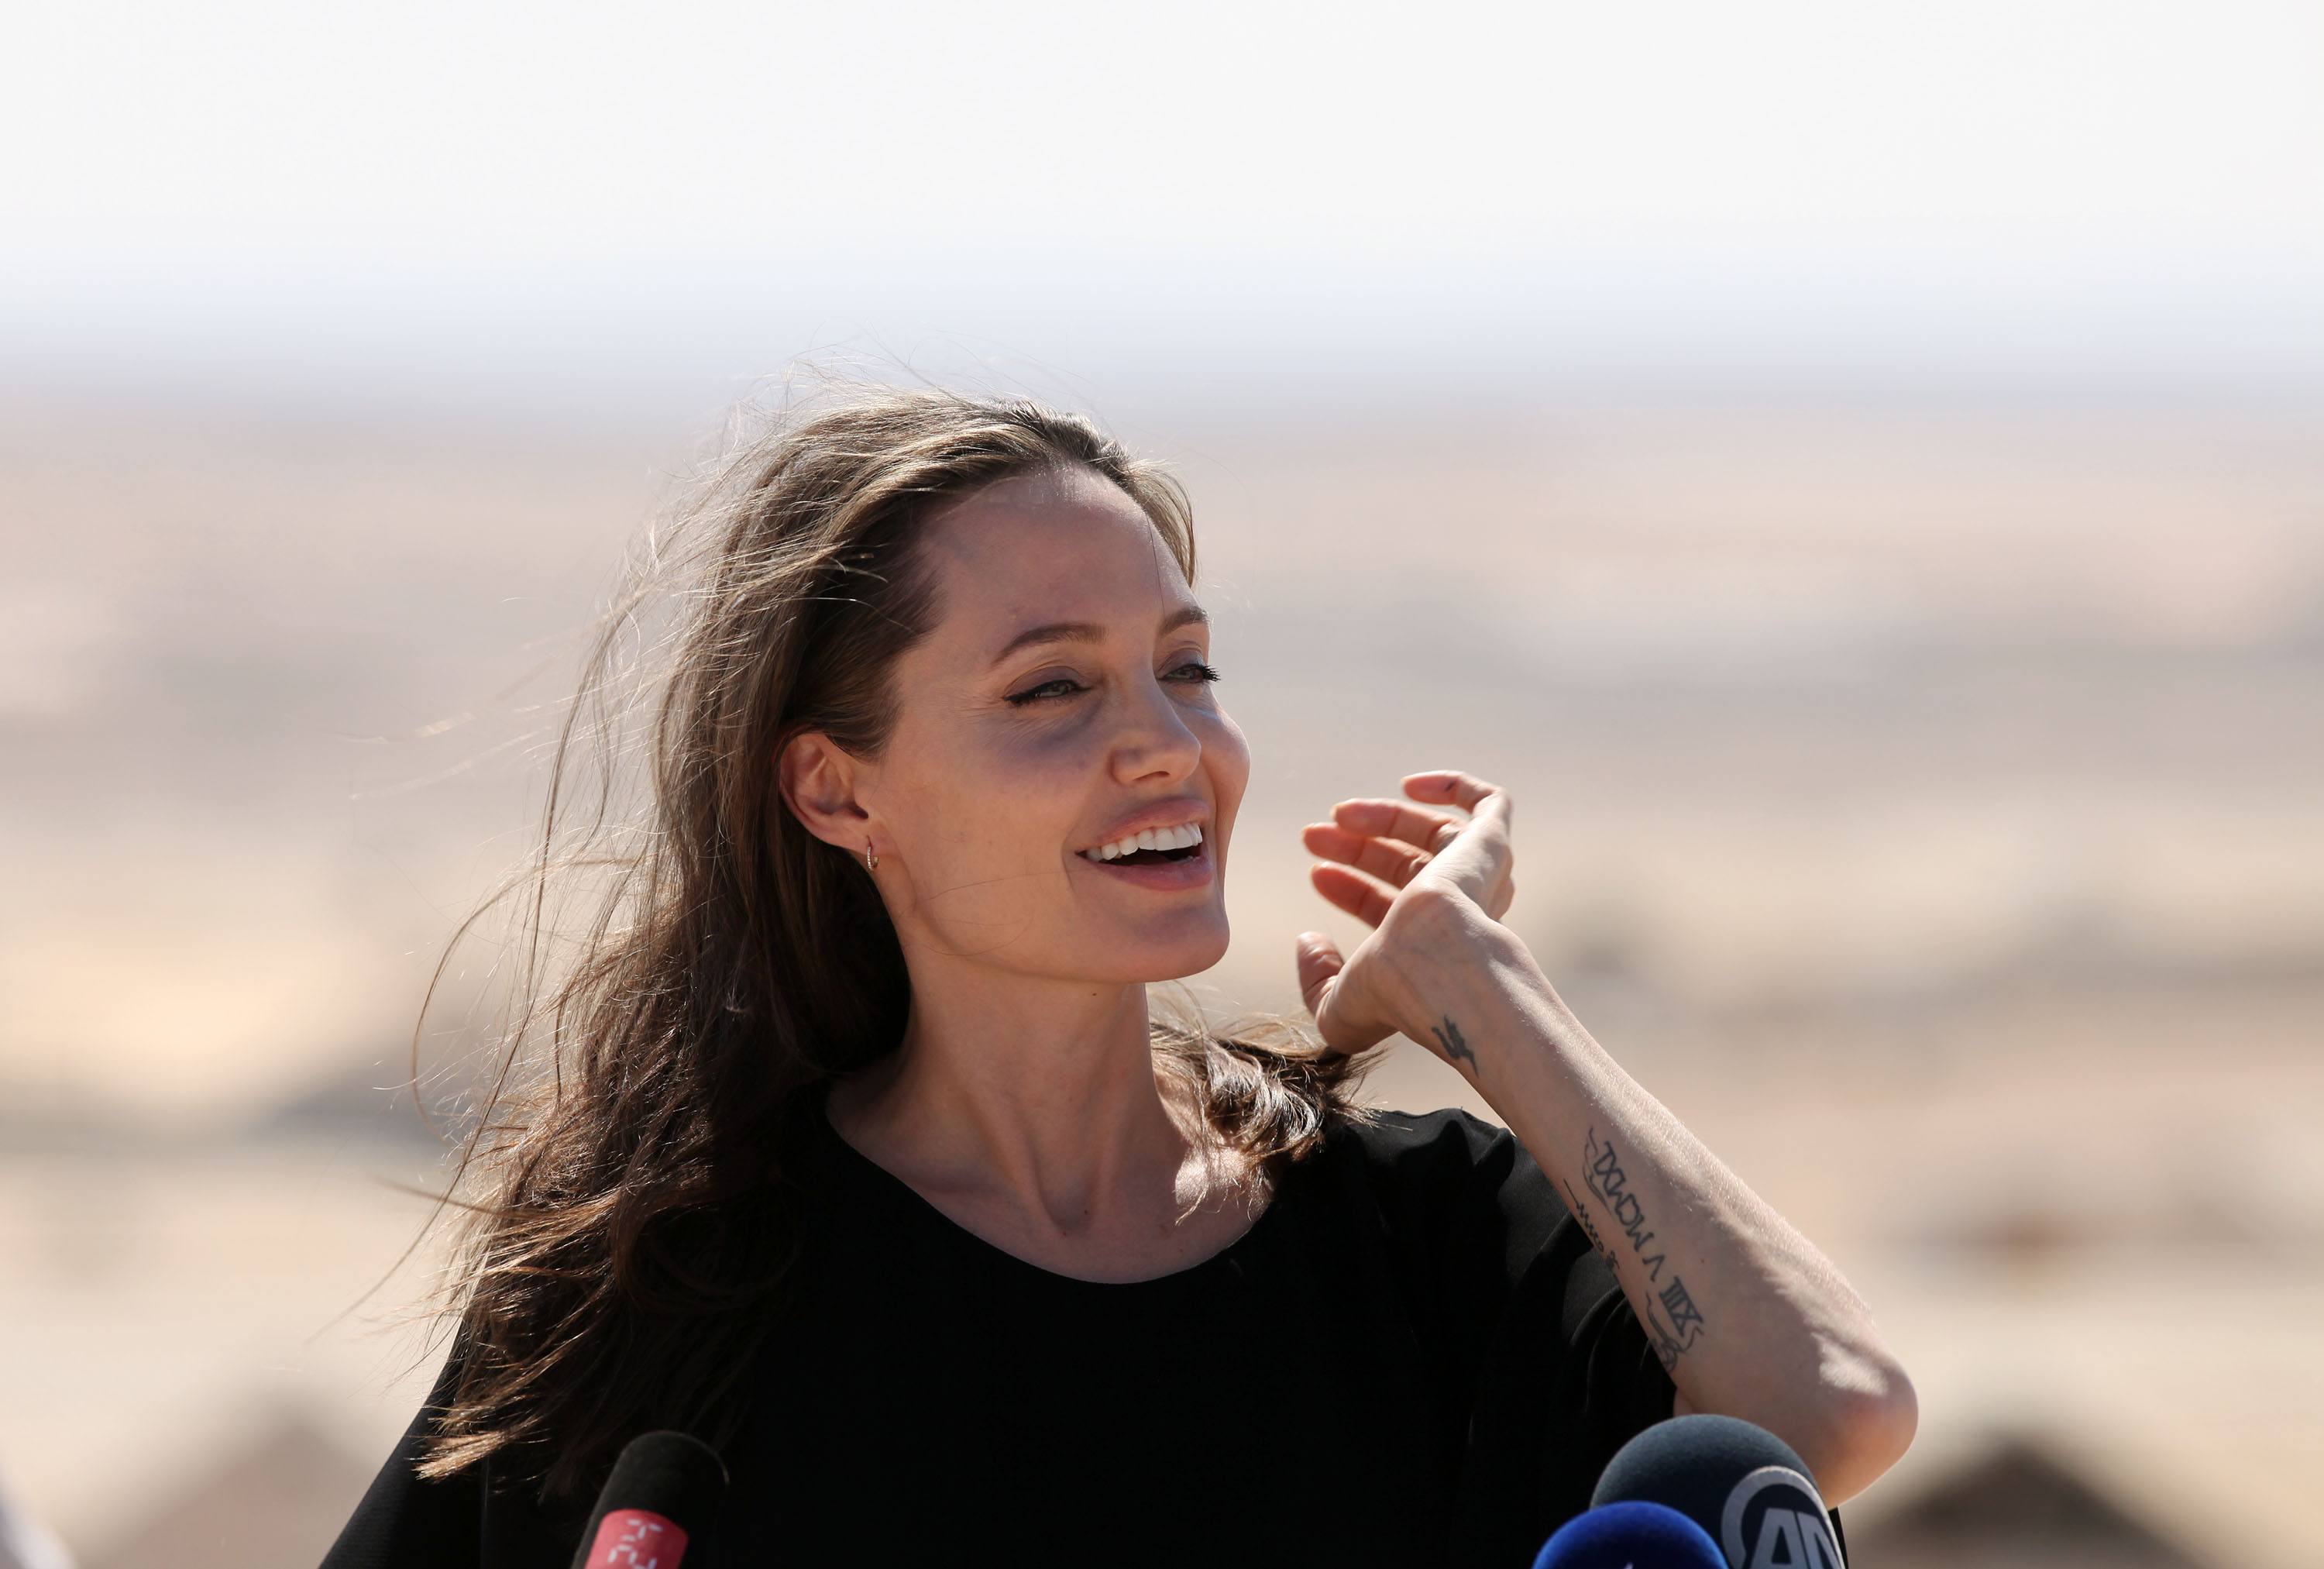  Angelina Jolie holds a press conference at Al- Azraq camp for Syrian refugees on September 9, 2016, in Azraq, Jordan